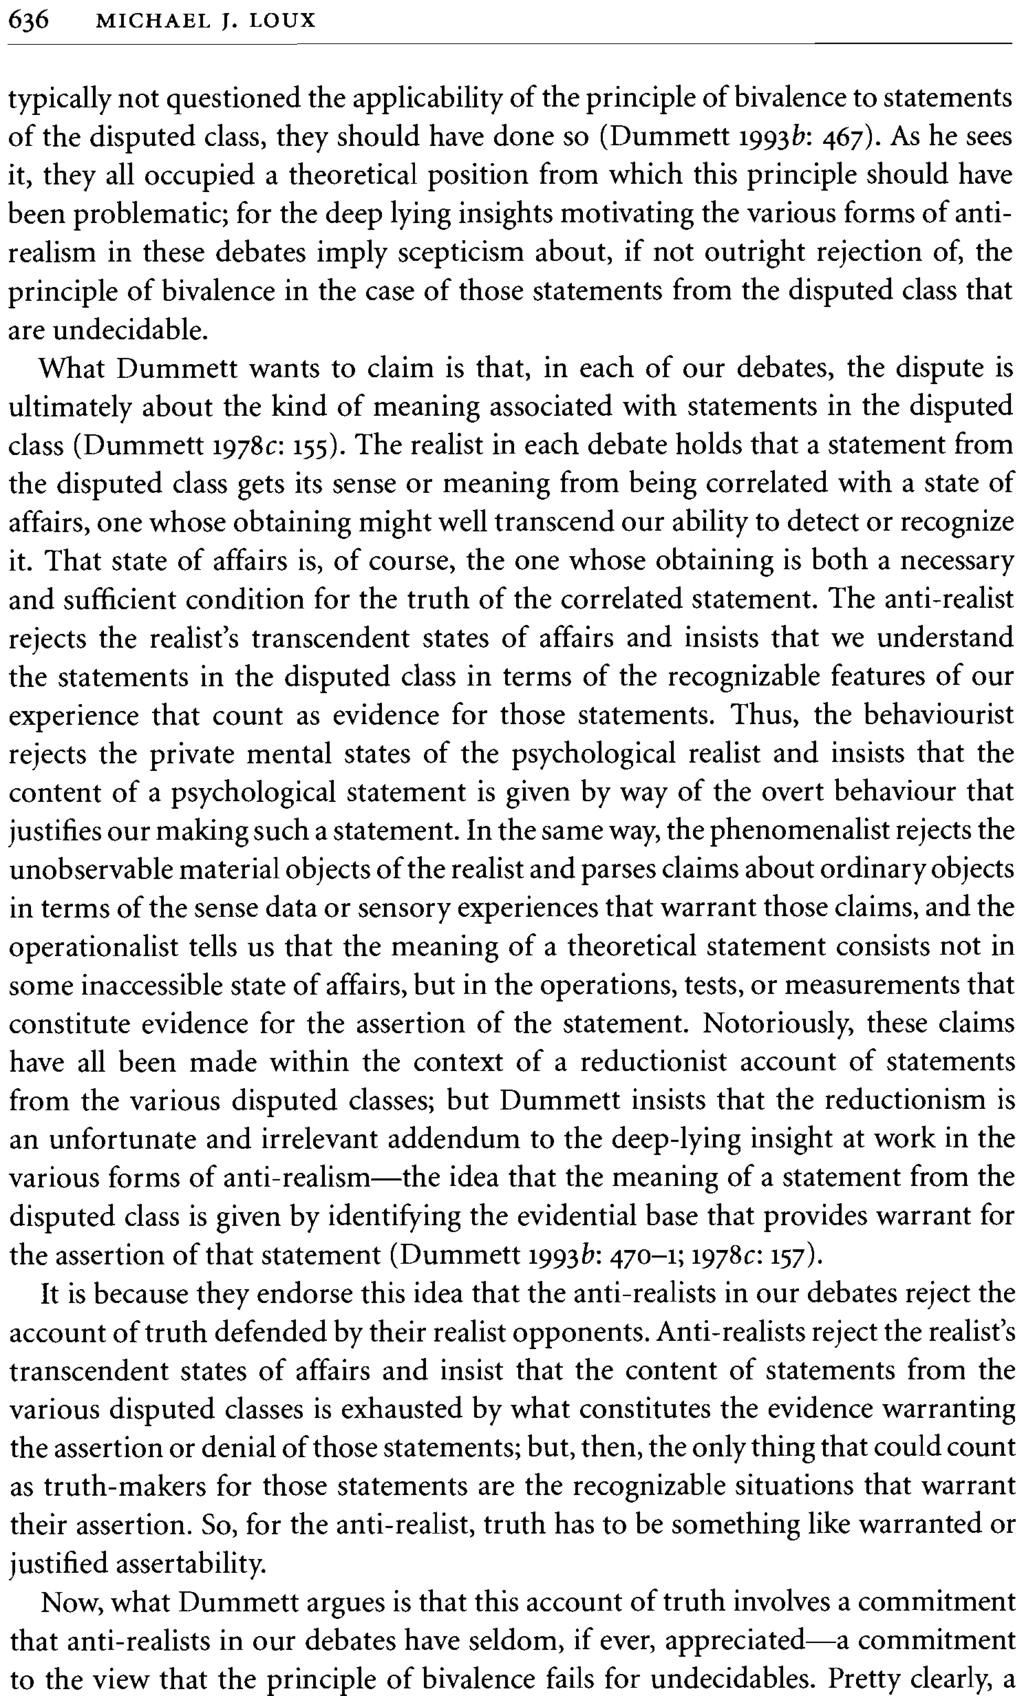 636 MICHAEL J. LOUX typically not questioned the applicability of the principle of bivalence to statements of the disputed class, they should have done so (Dummett 1993b: 467).